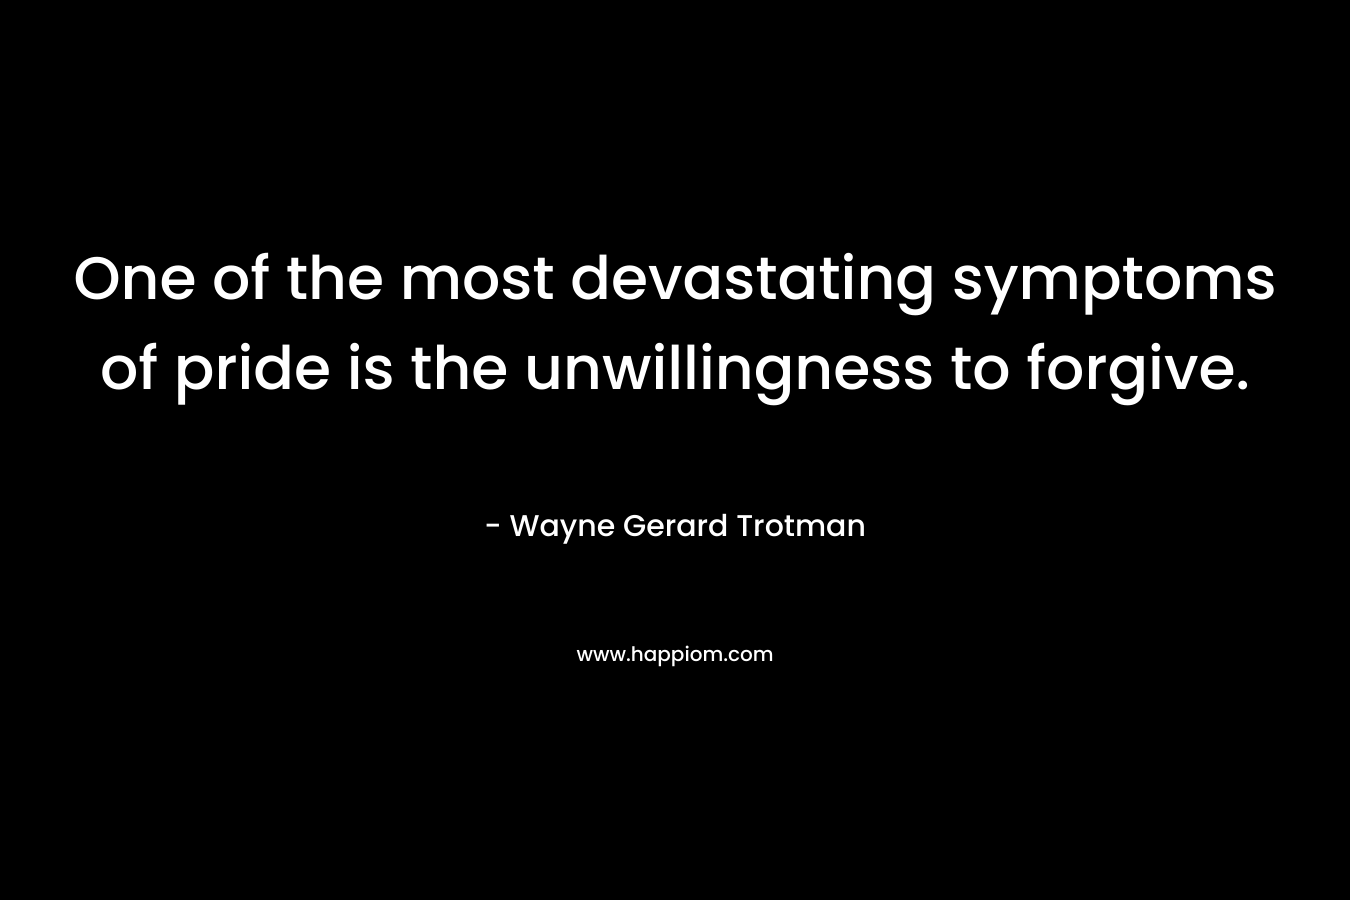 One of the most devastating symptoms of pride is the unwillingness to forgive.